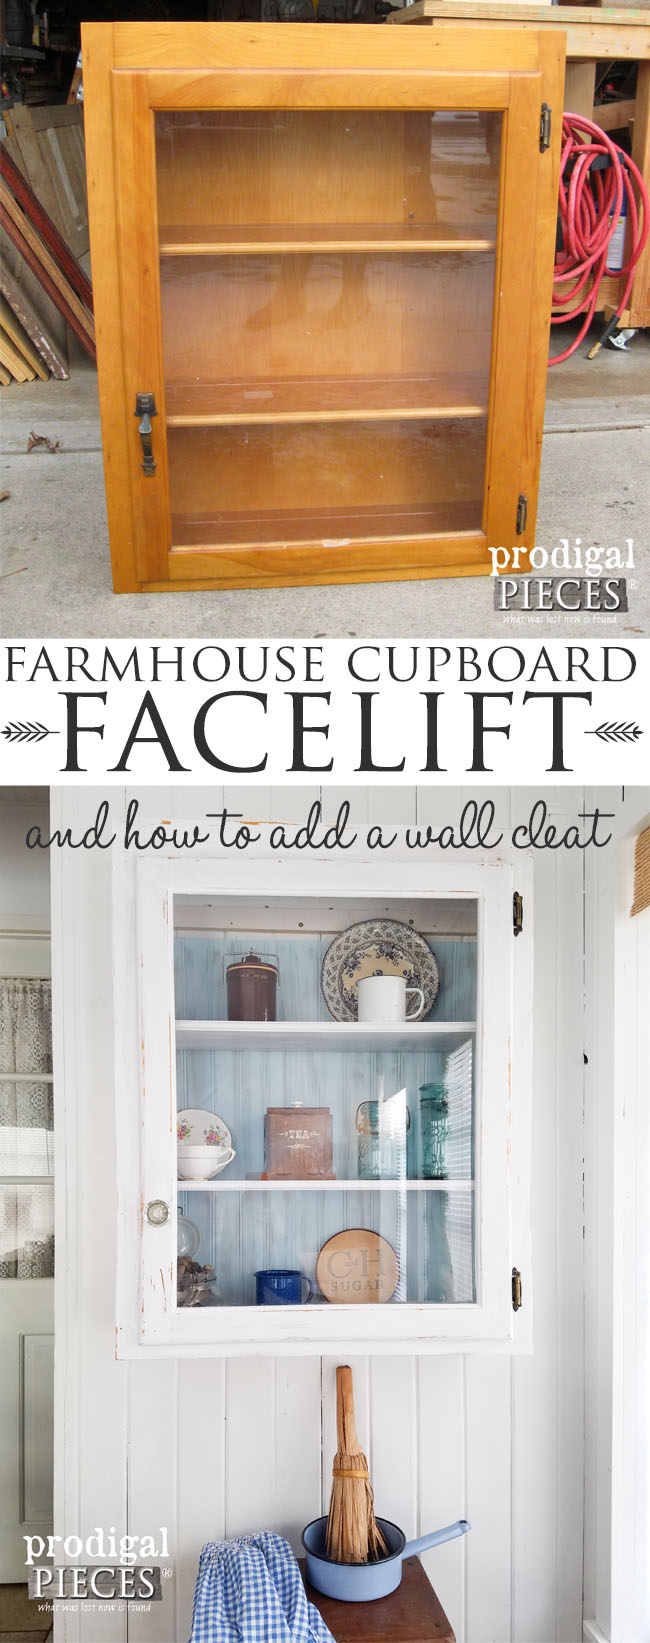 Farmhouse Cupboard Makeover with Tutorial on Adding a Wall Cleat by Prodigal Pieces | prodigalpieces.com